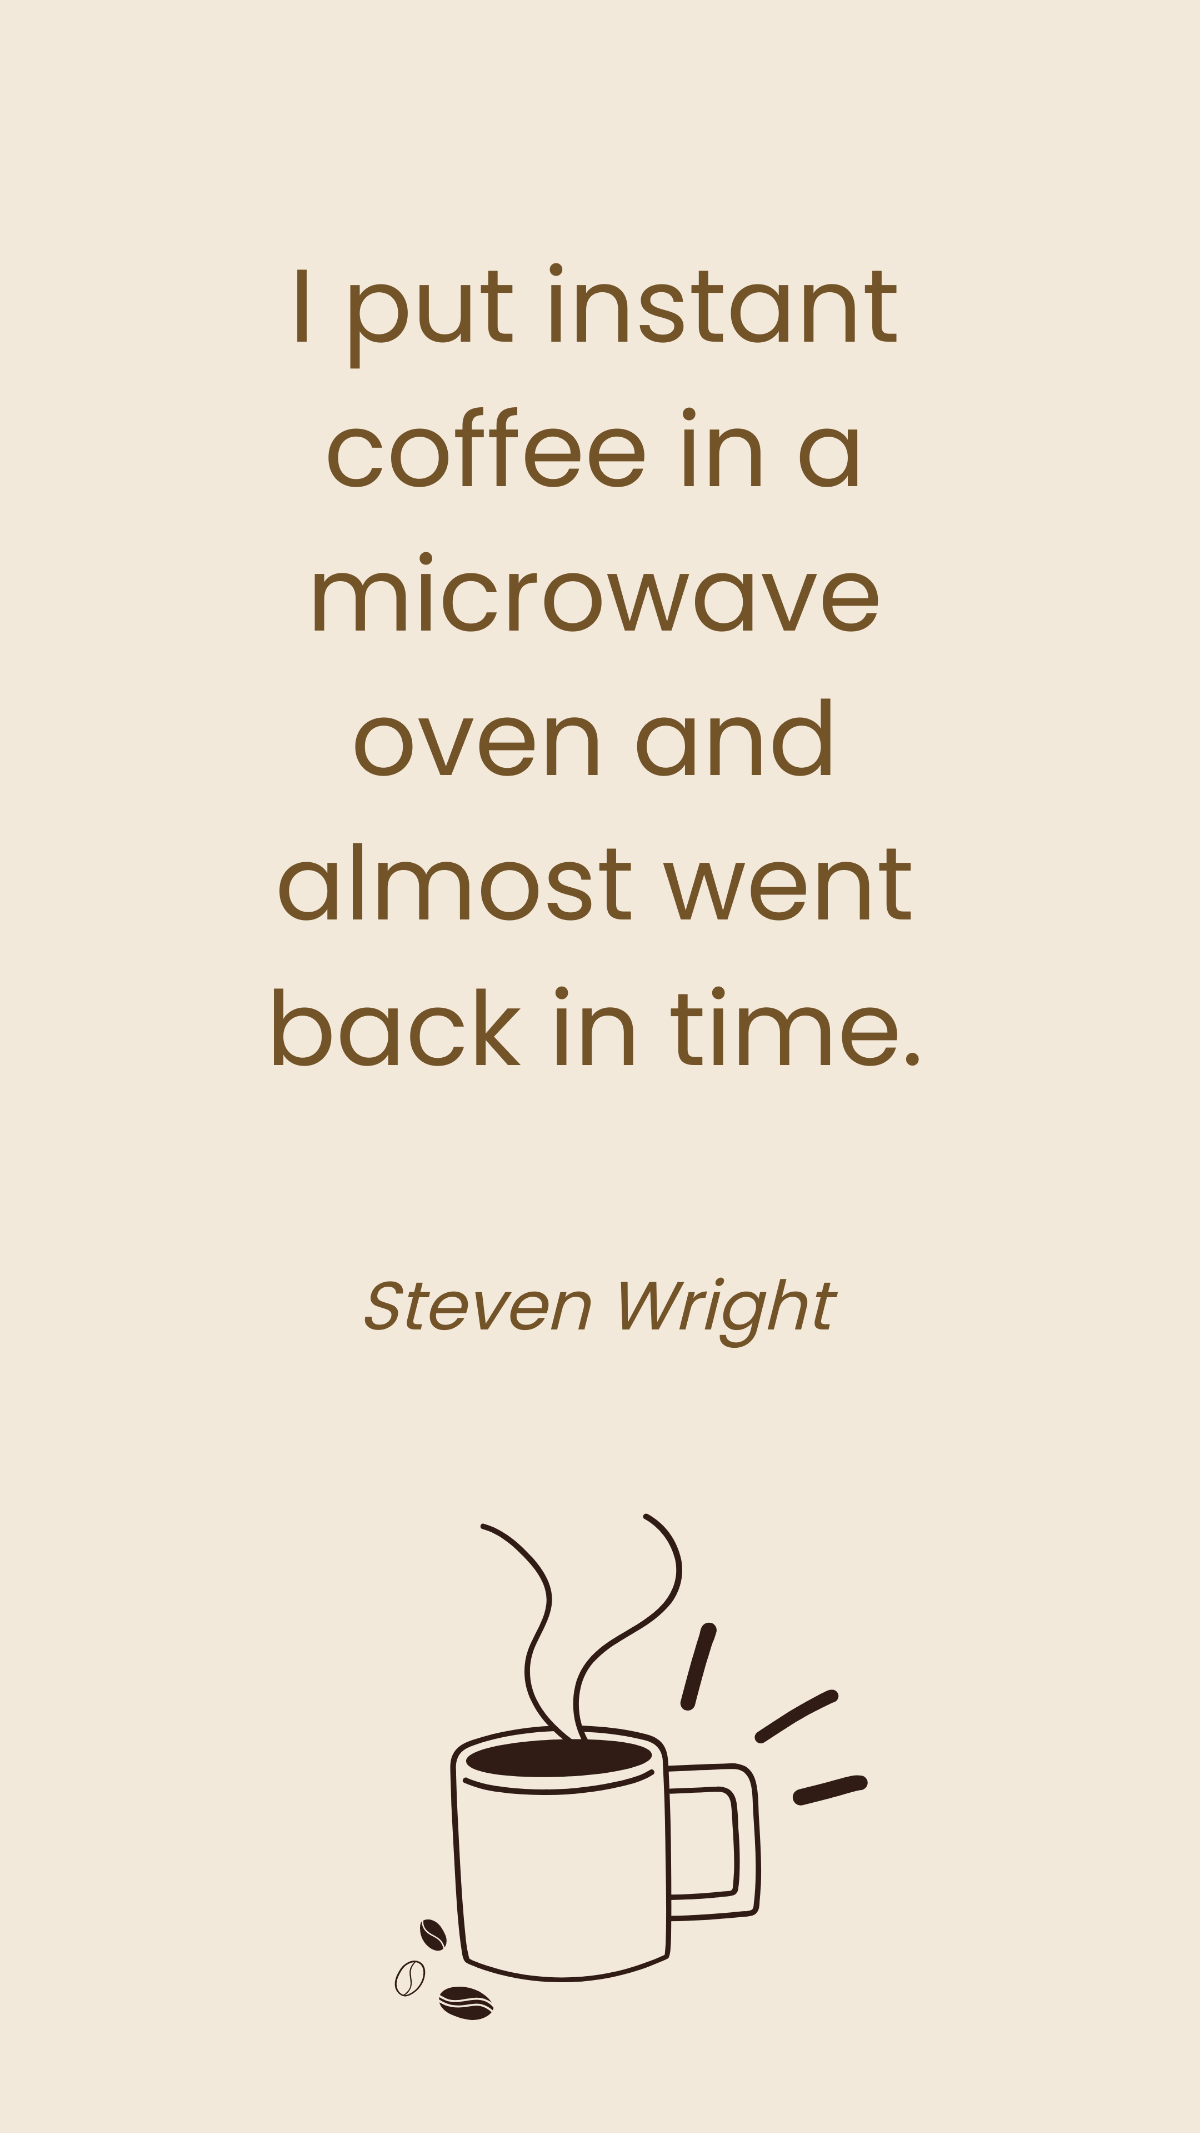 Steven Wright - I put instant coffee in a microwave oven and almost went back in time.